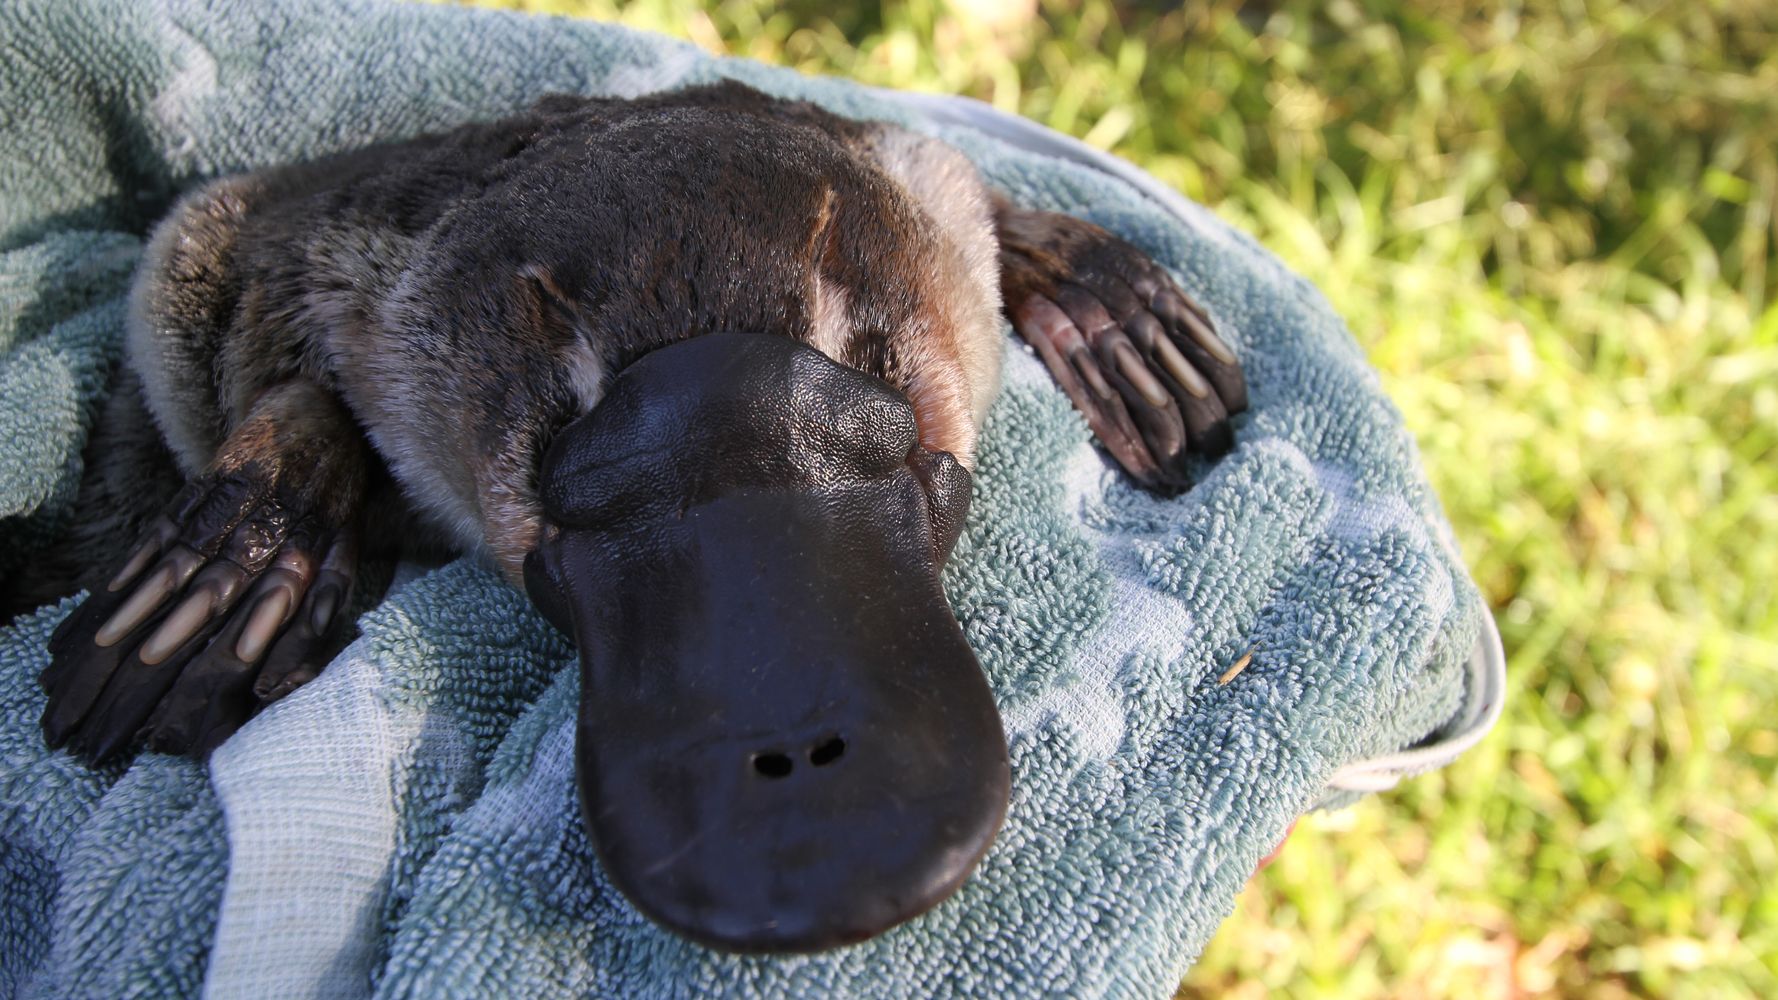 Platypuses To Be Reintroduced To Australia’s Oldest National Park After Half-Century